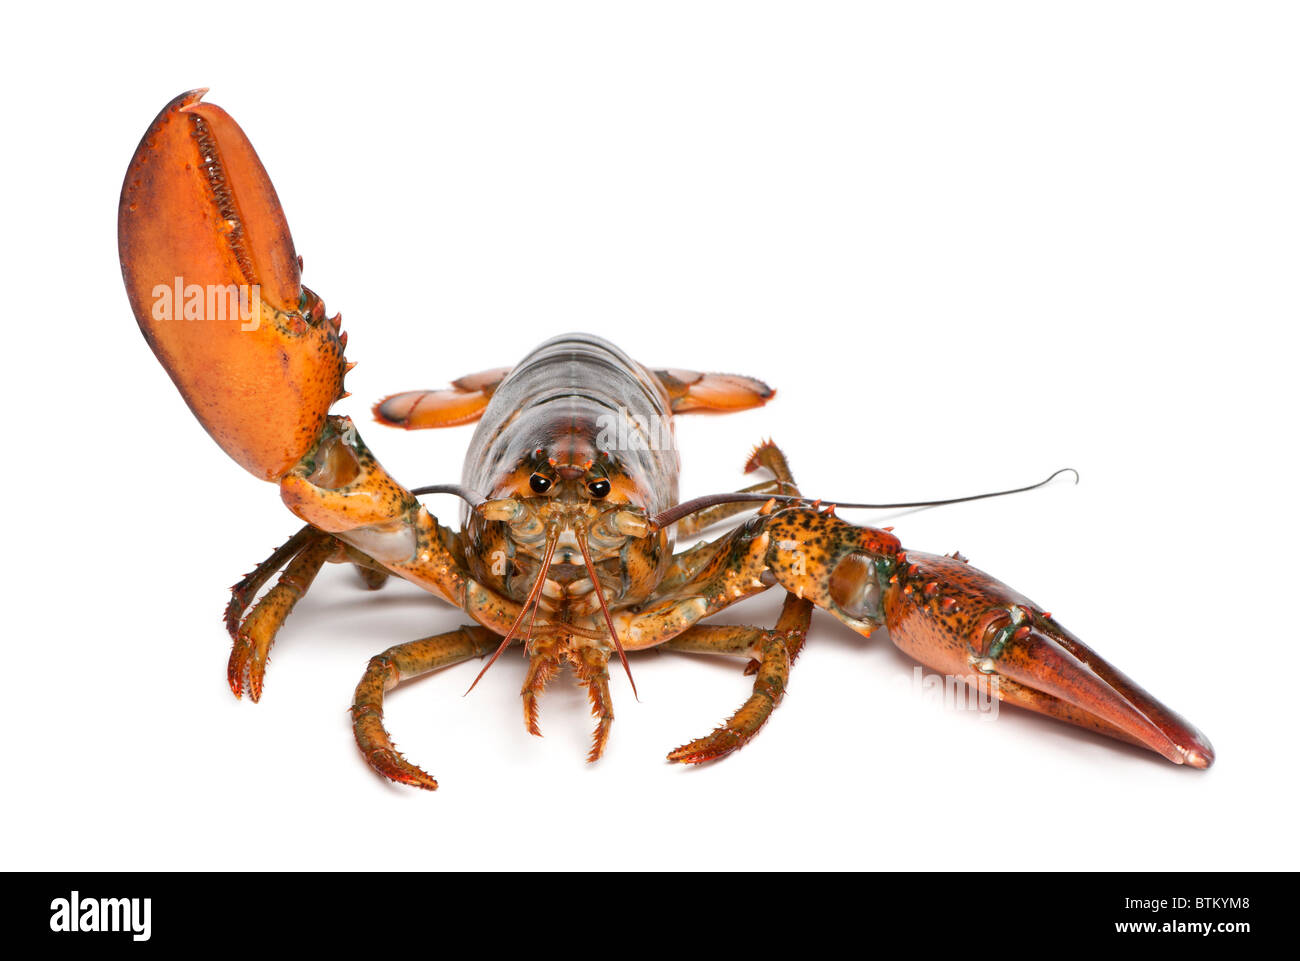 American lobster, Homarus americanus, in front of white background Stock Photo